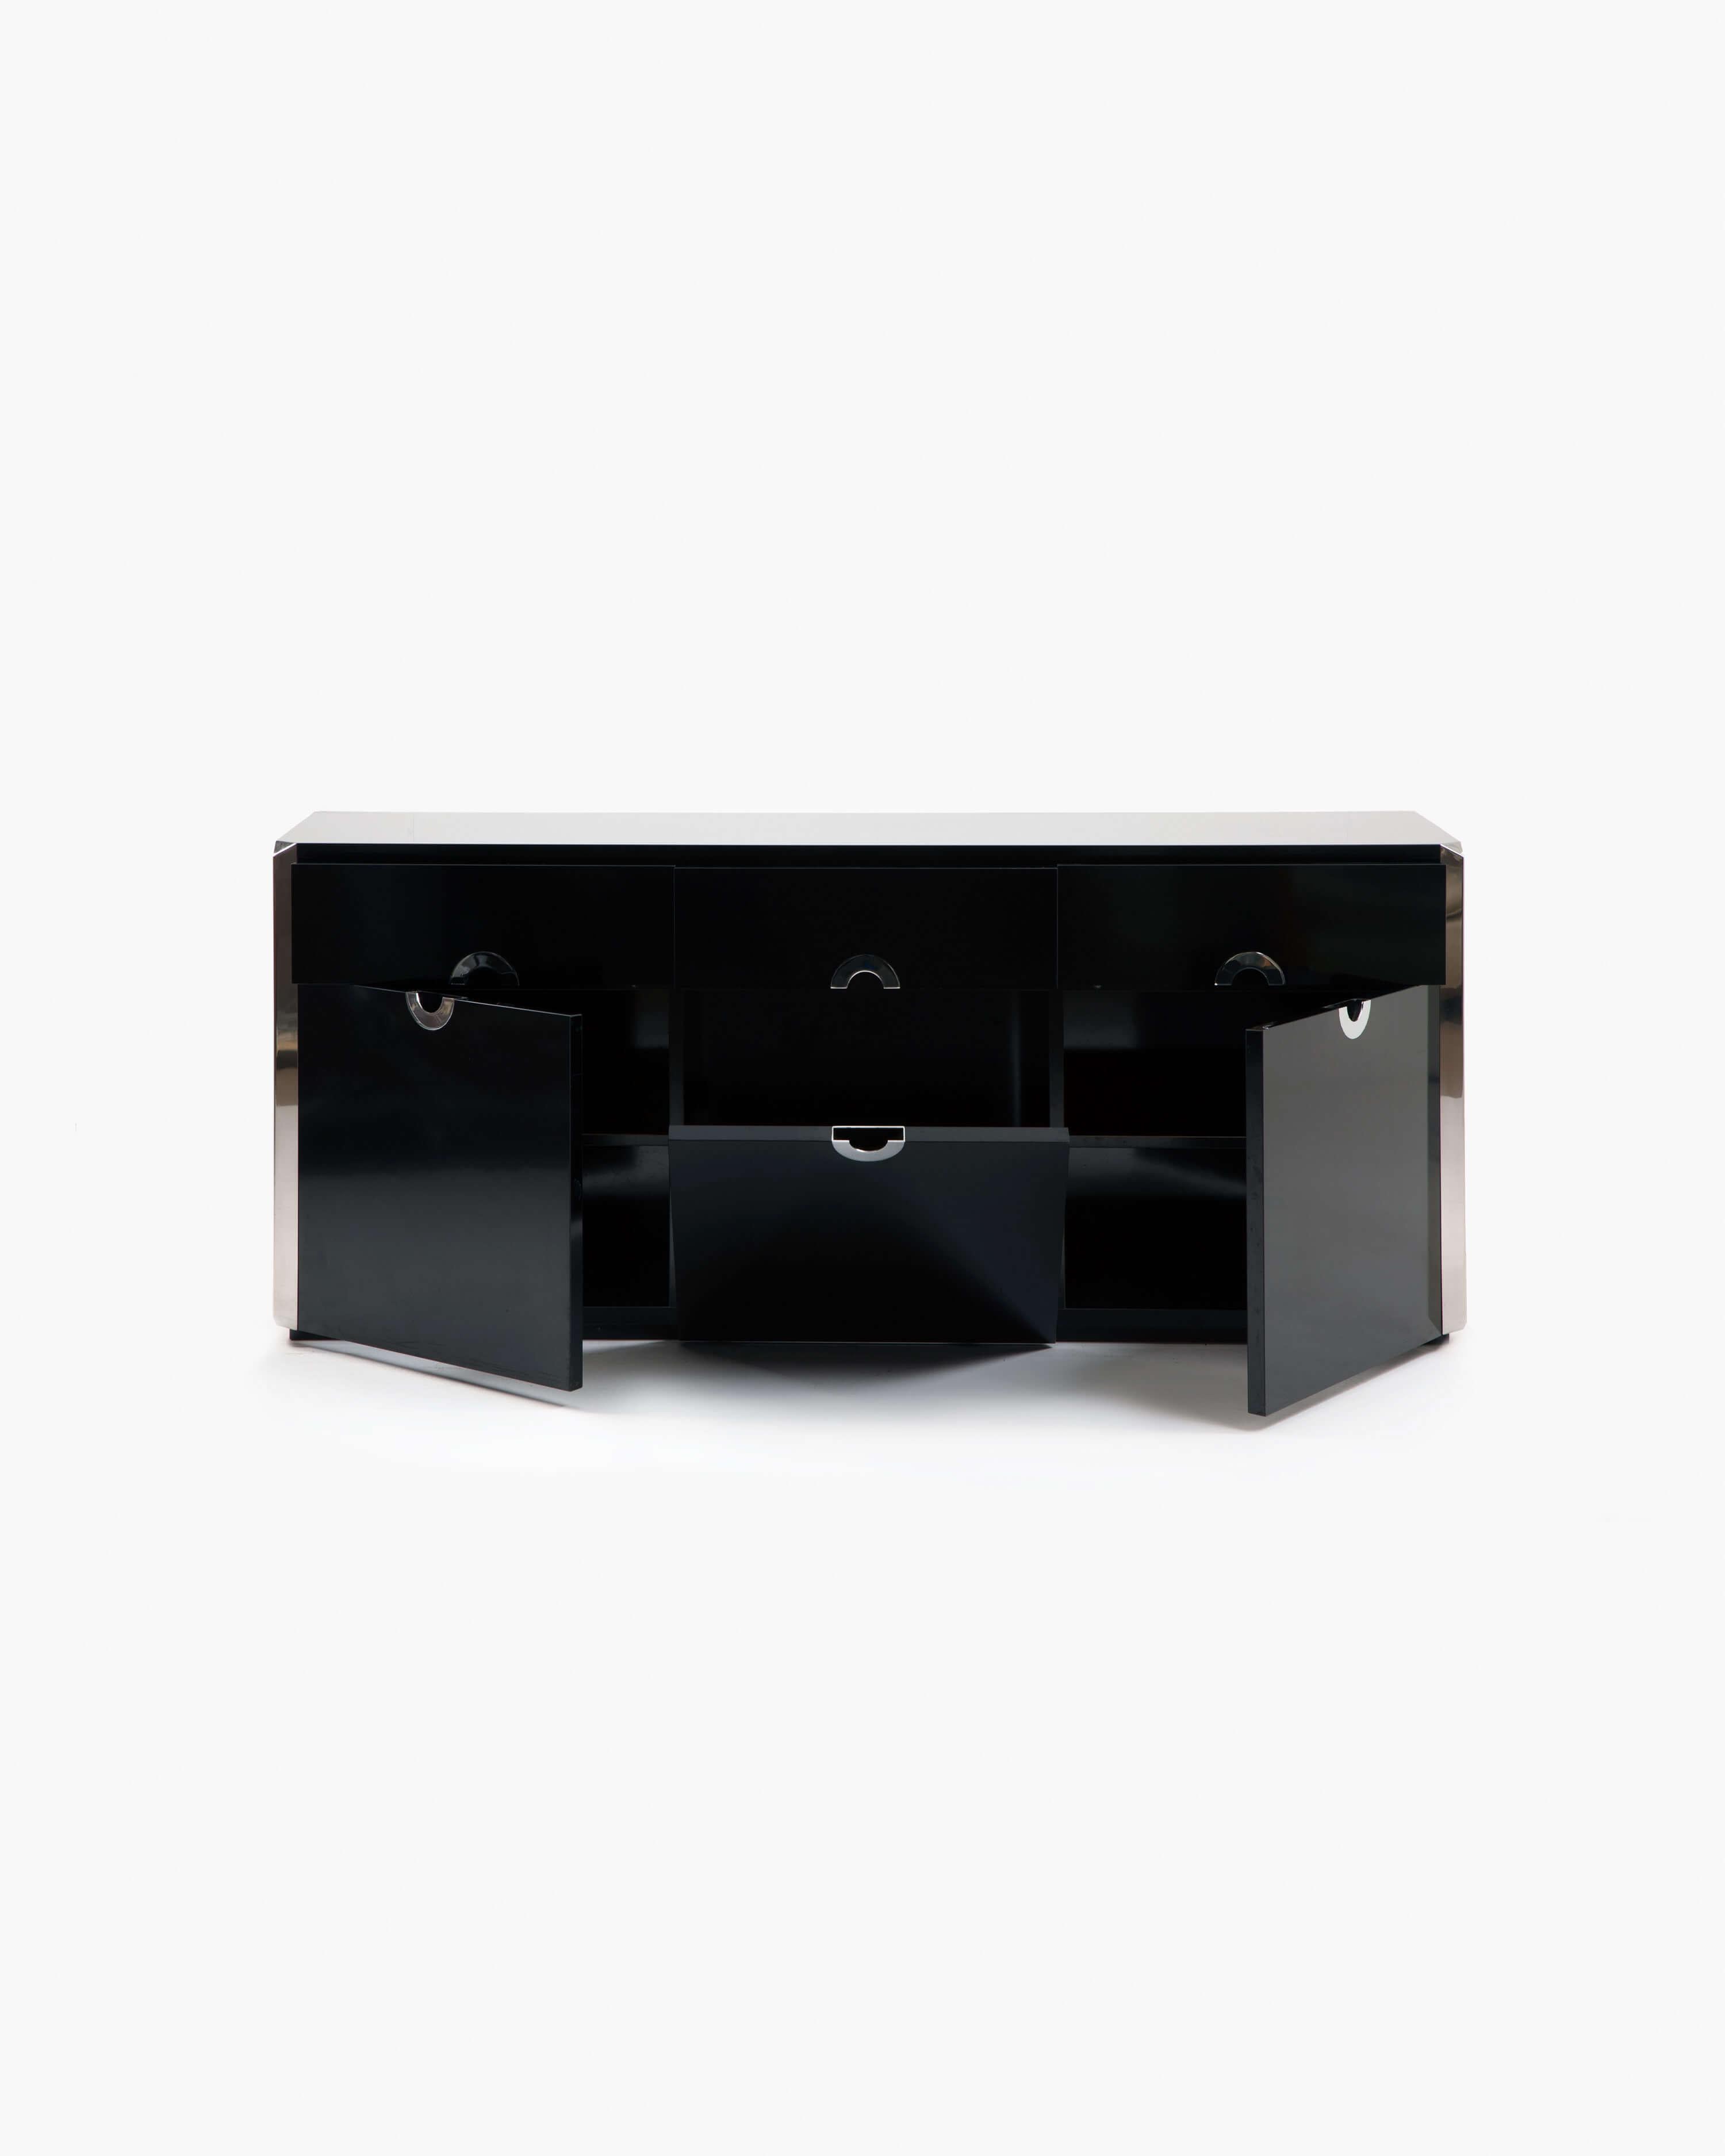 Lacquered Alveo Sideboard by Willy Rizzo in Black Lacquer with Chrome detailing, 1970s For Sale